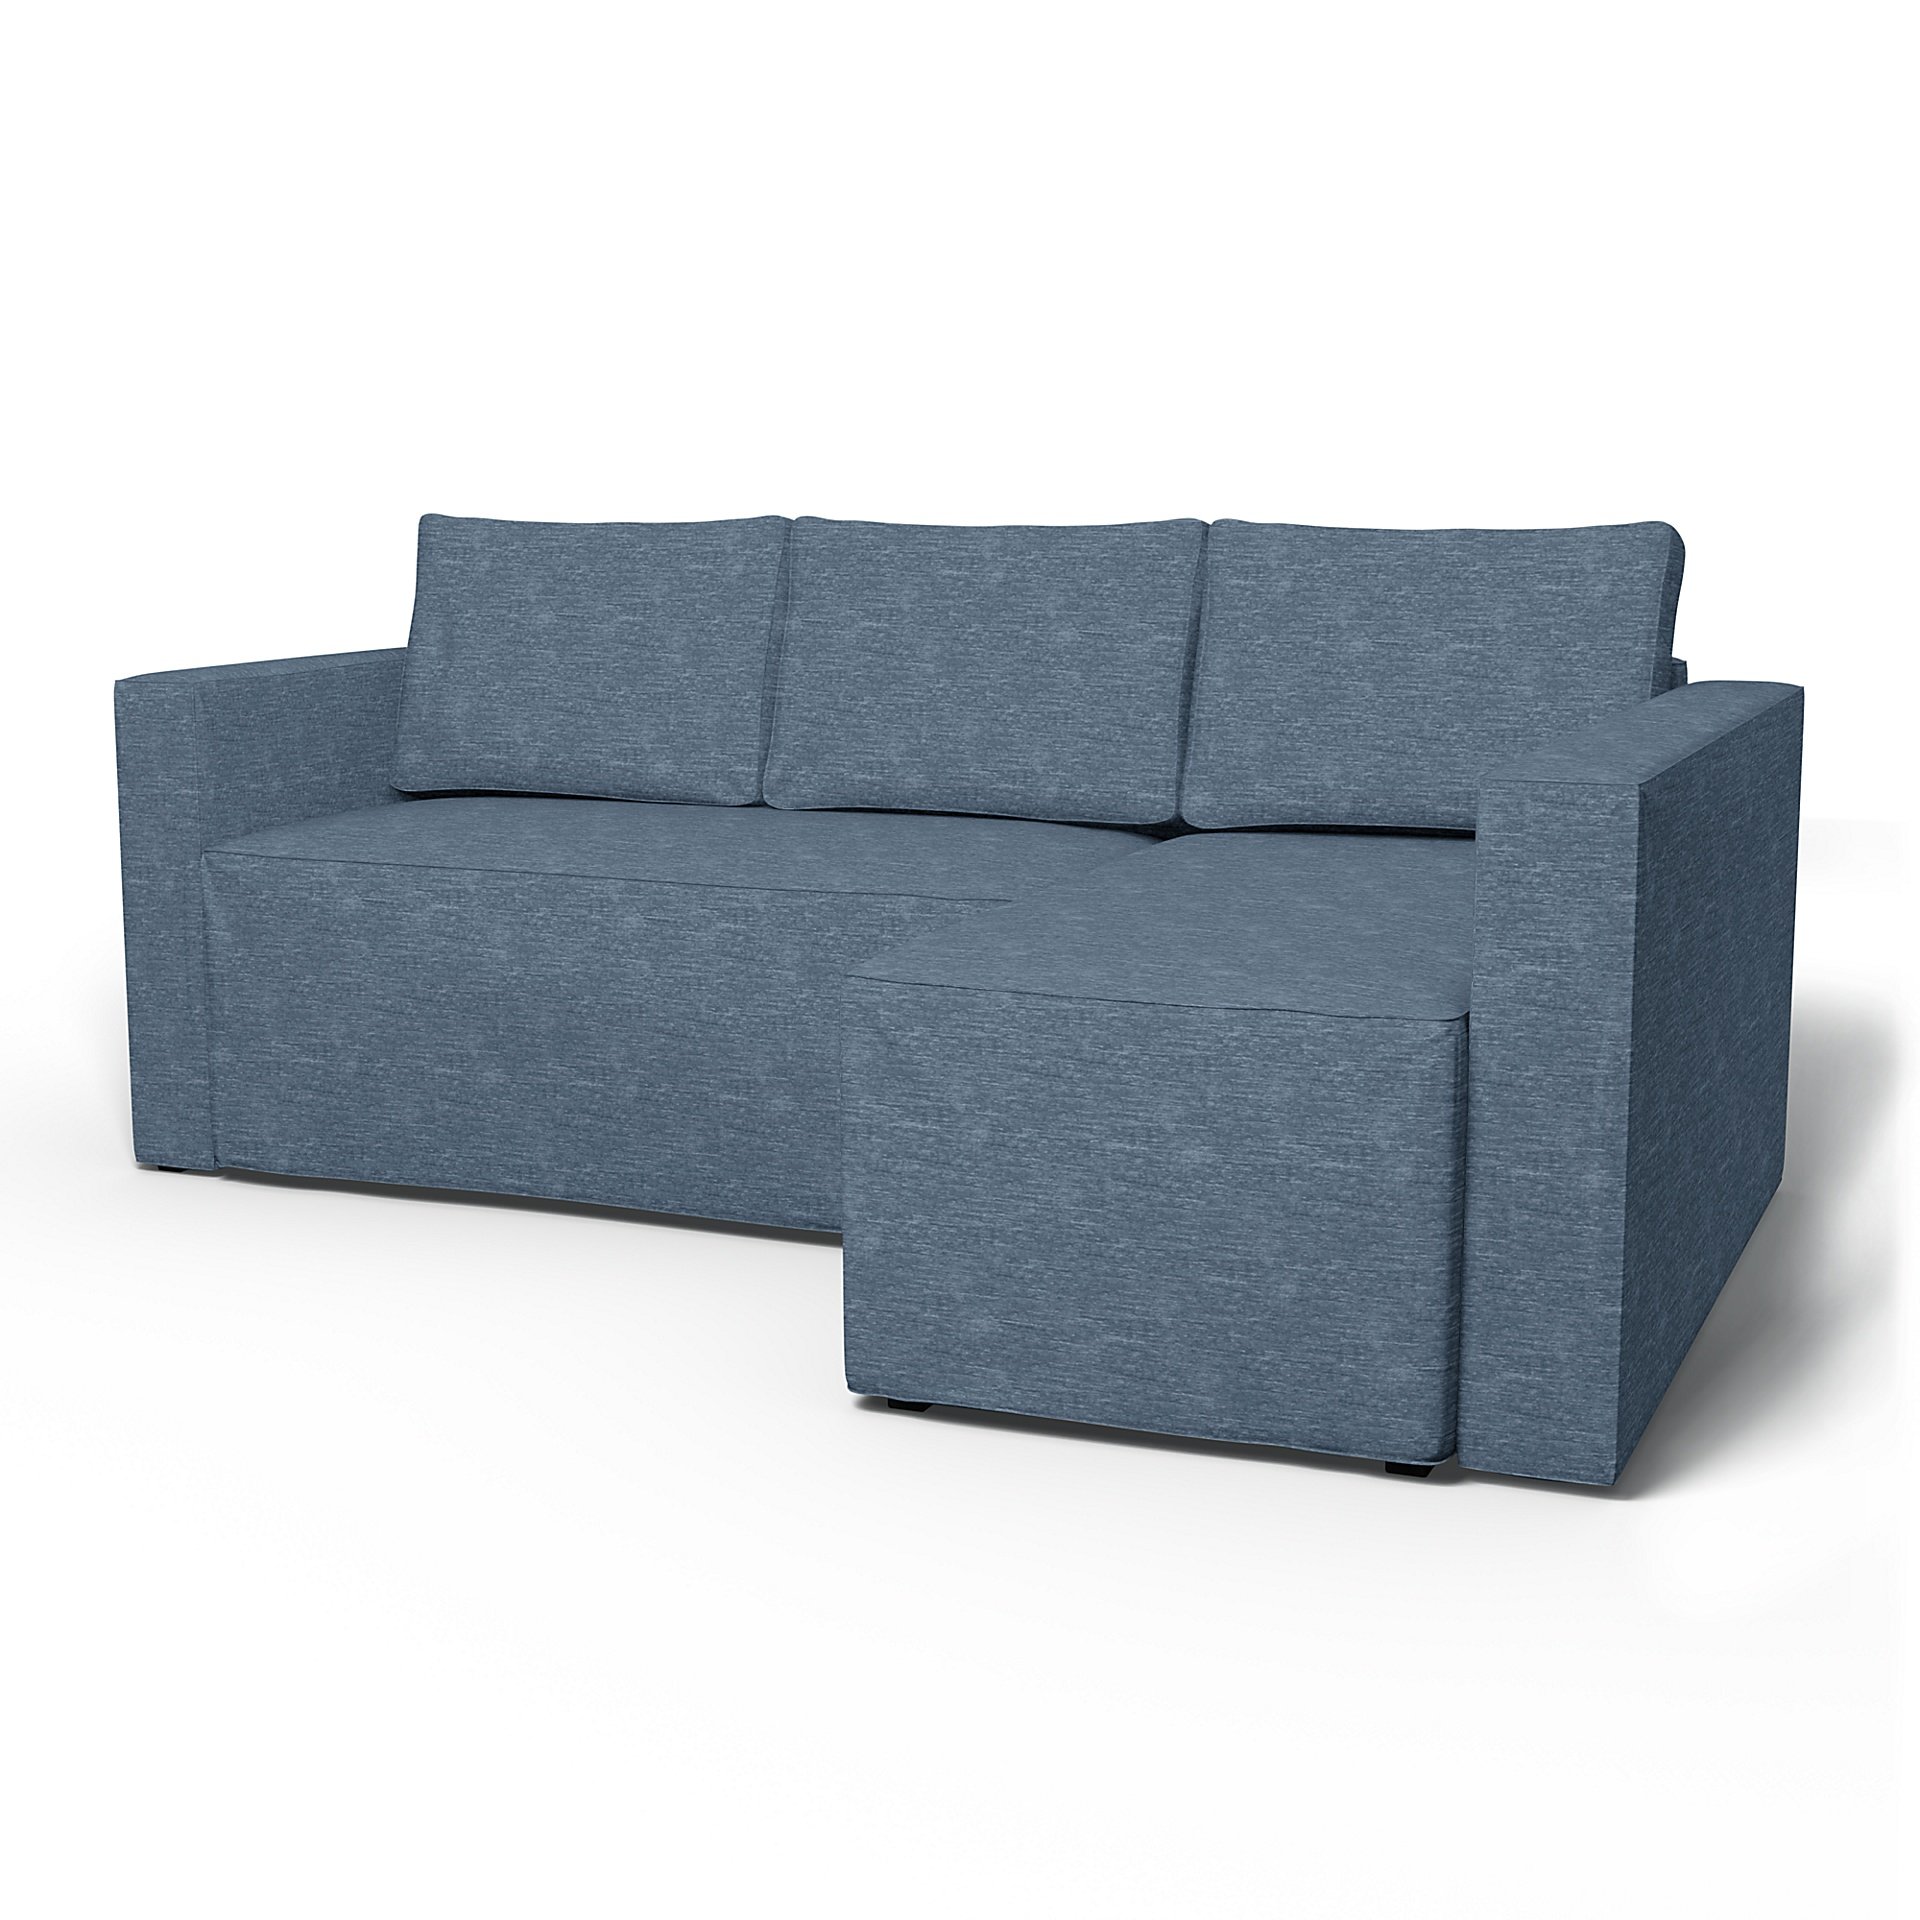 IKEA - Manstad Sofa Bed with Right Chaise Cover, Mineral Blue, Velvet - Bemz